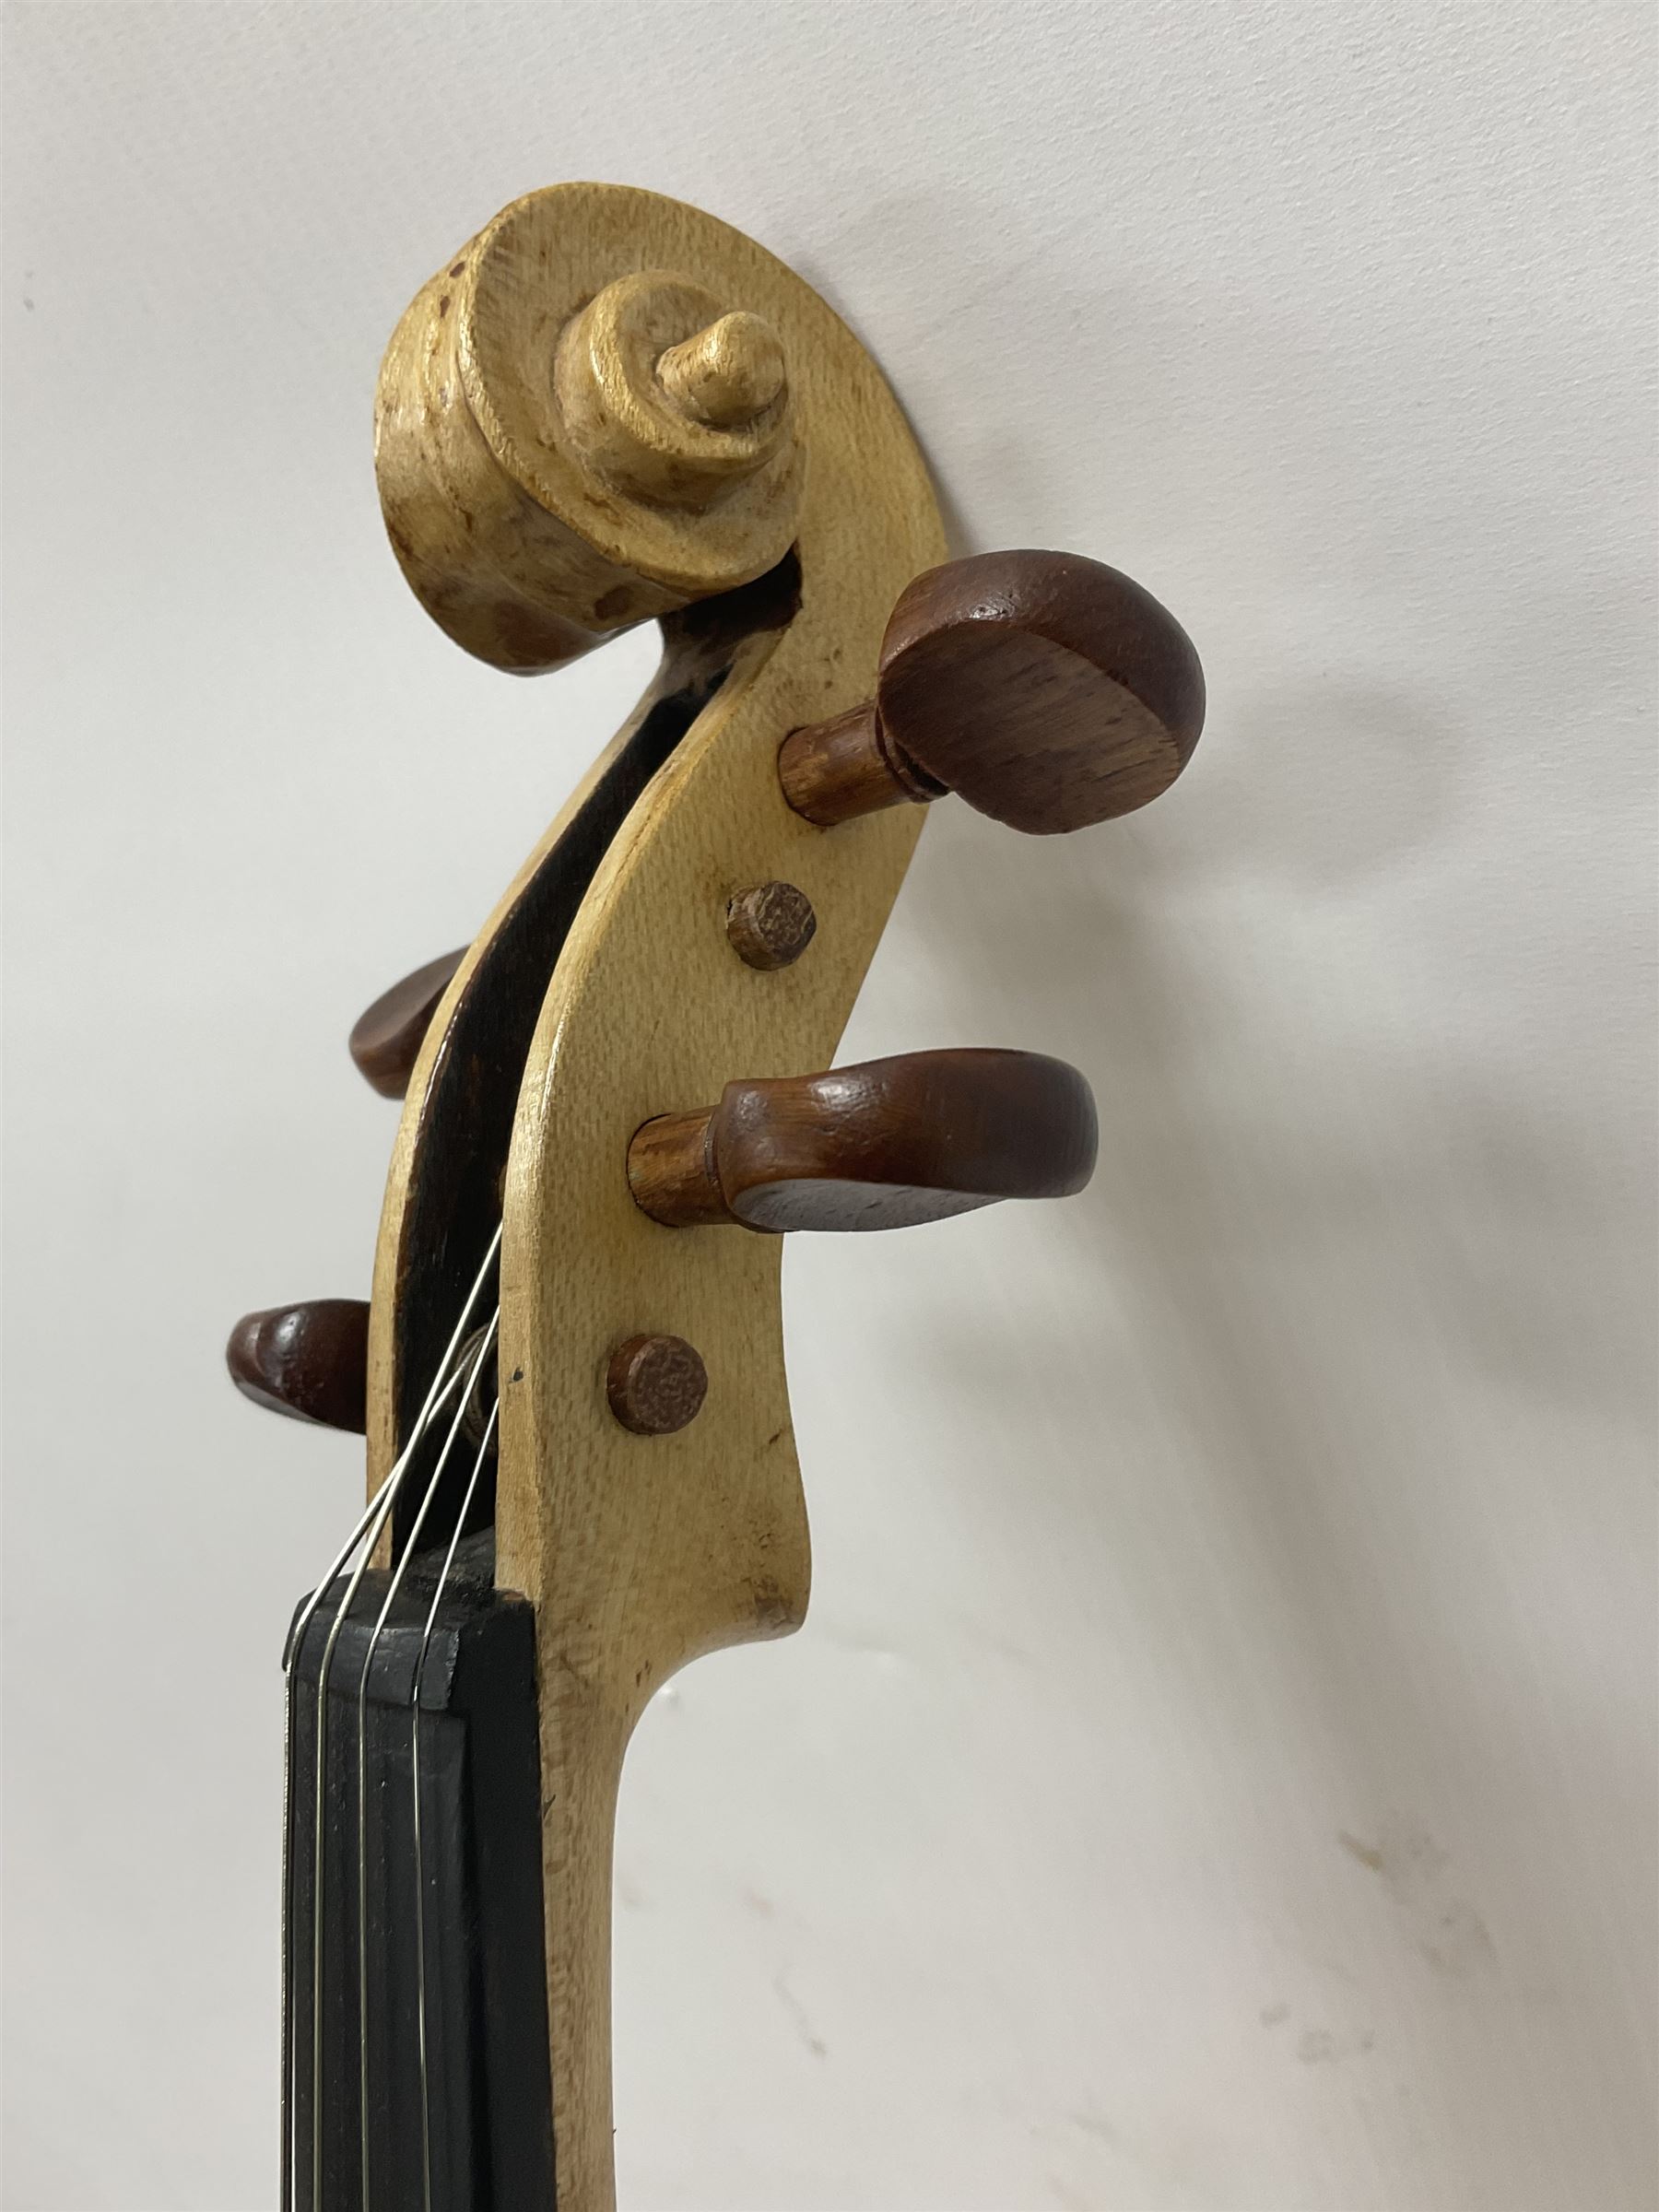 Copy of a full size Stradivarius violin with an ebonised fingerboard and tailpiece - Image 7 of 14